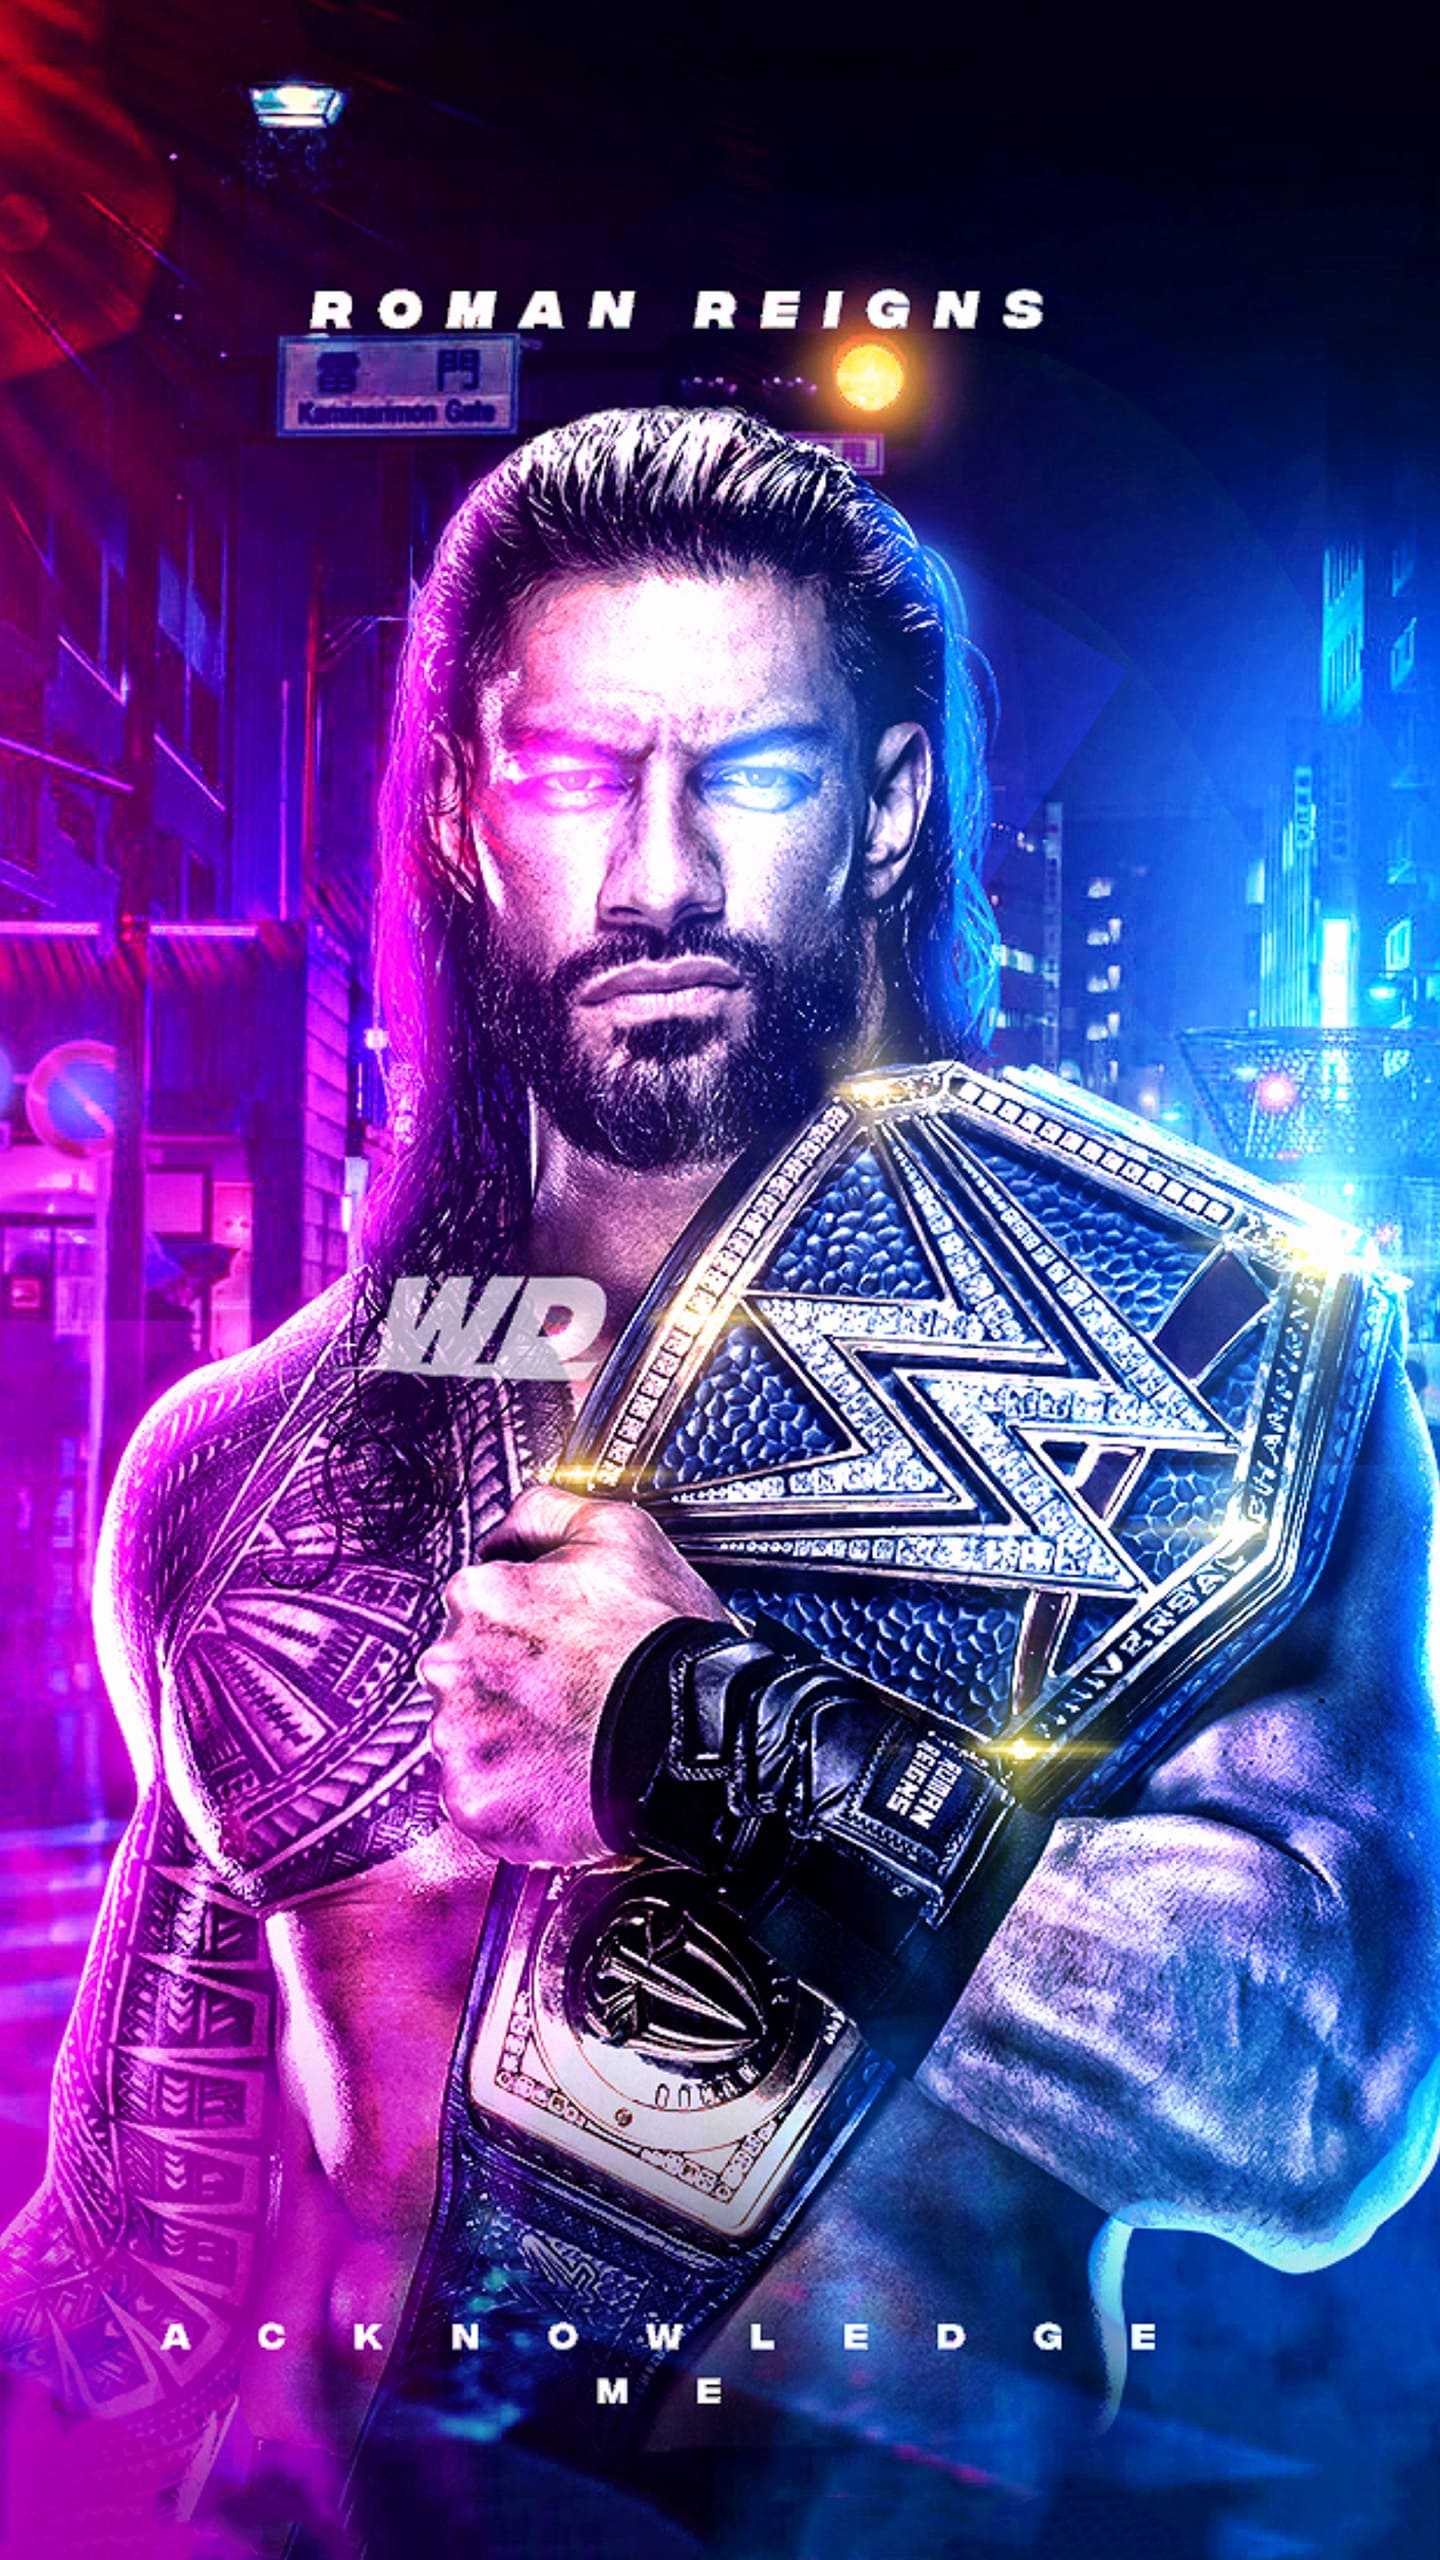 Download Iconroman Reigns - Roman Reigns Wallpaper Iphone PNG Image with No  Background - PNGkey.com